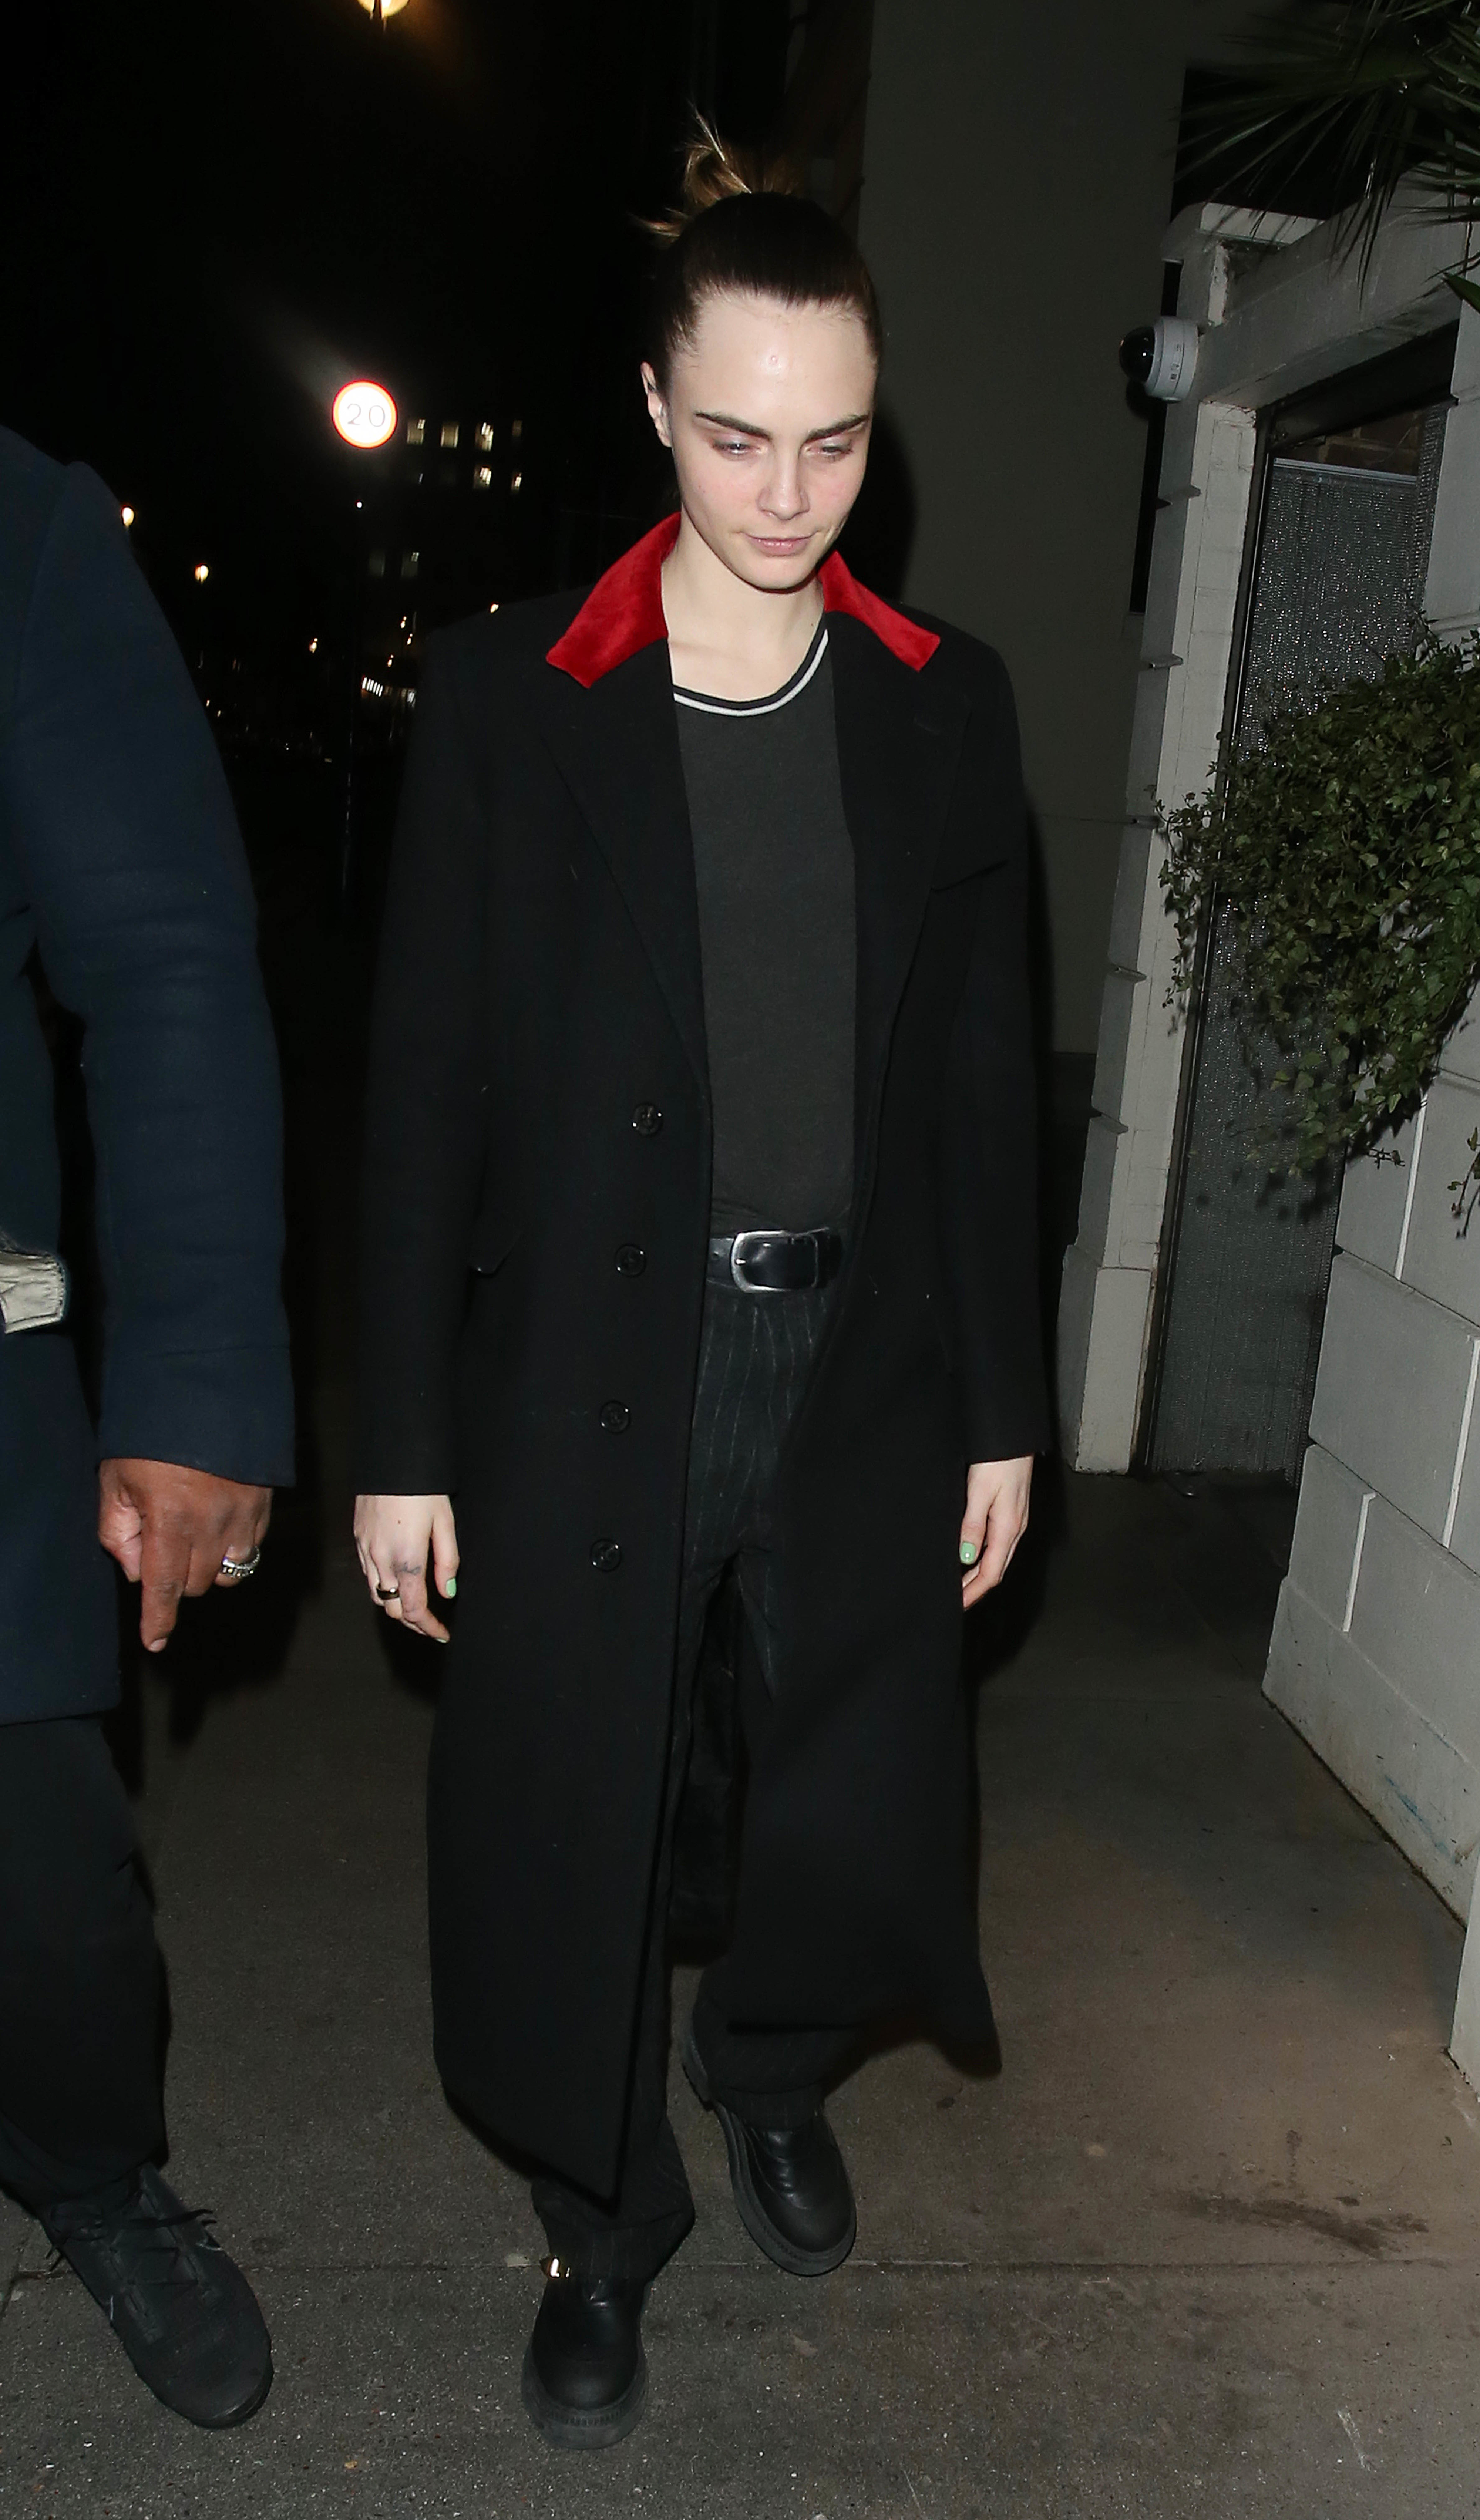 Cara Delevingne in a long coat walks outside at night